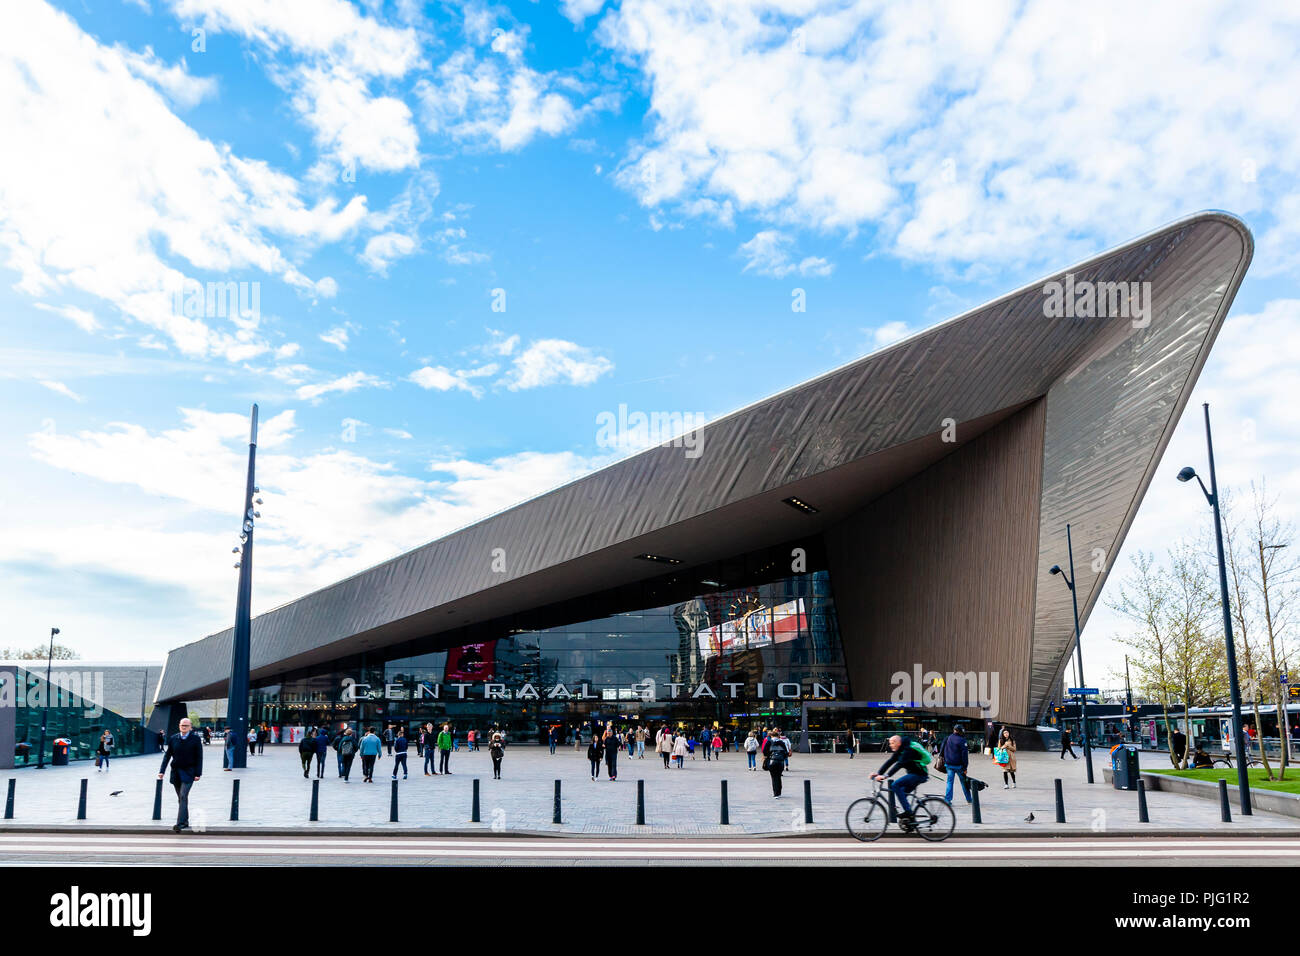 ROTTERDAM, Netherlands - April 15 2017: Rotterdam Centraal Rail Station modern architecture landscape view with commuters Stock Photo